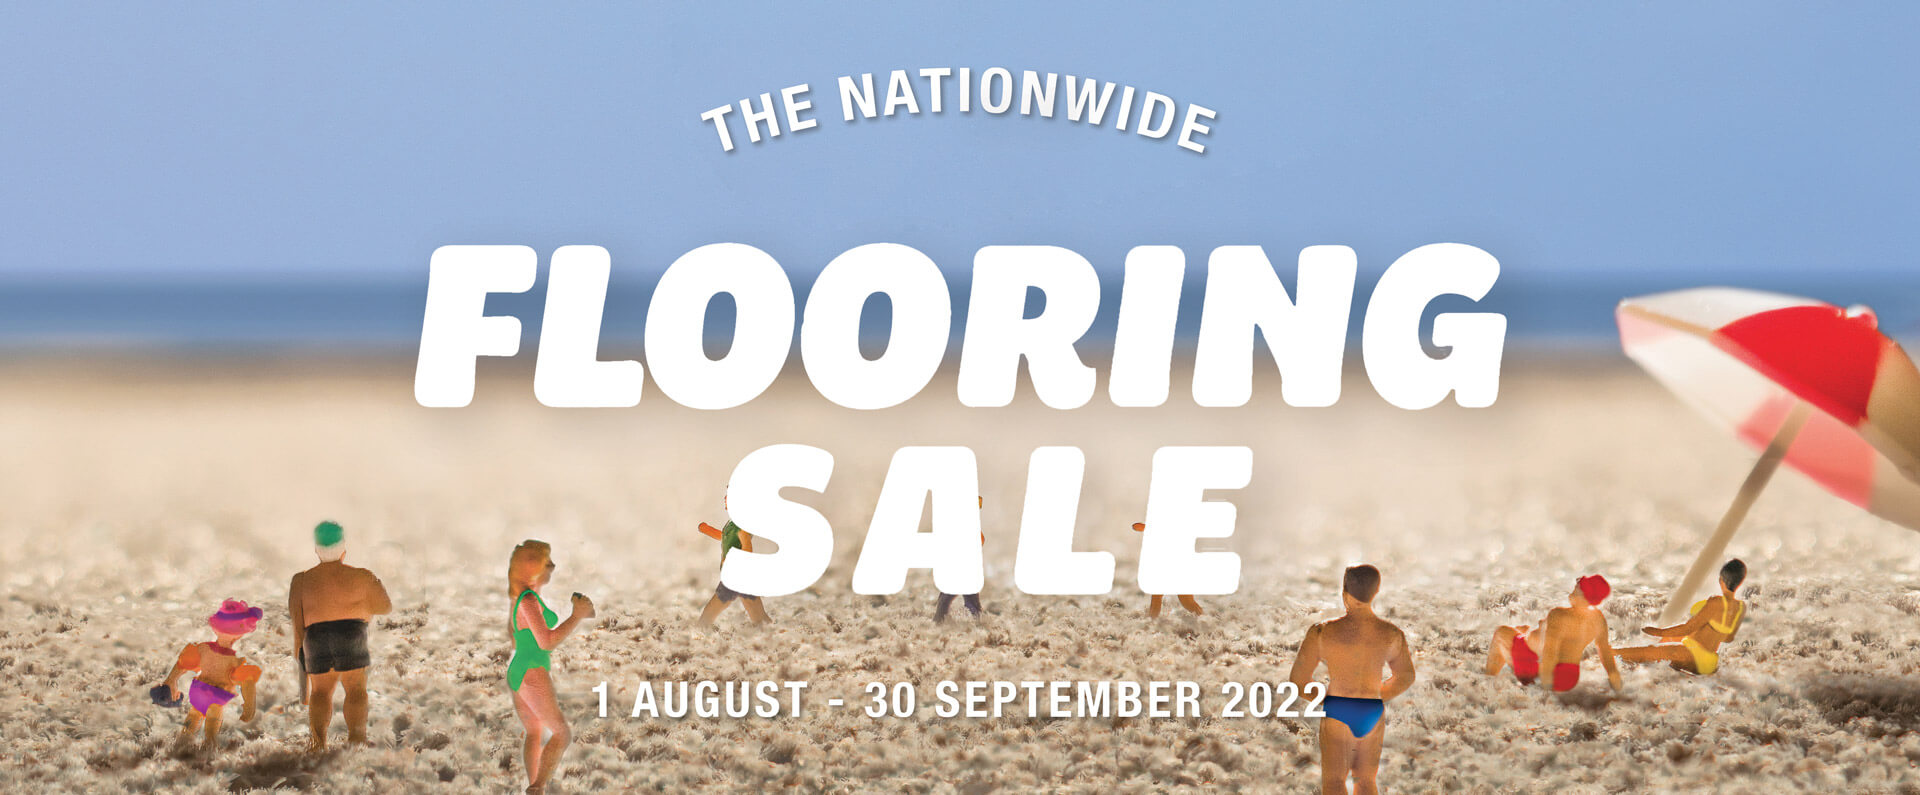 NSW_Doubles_Poster_Flooring-Sale-2Narrow (1)